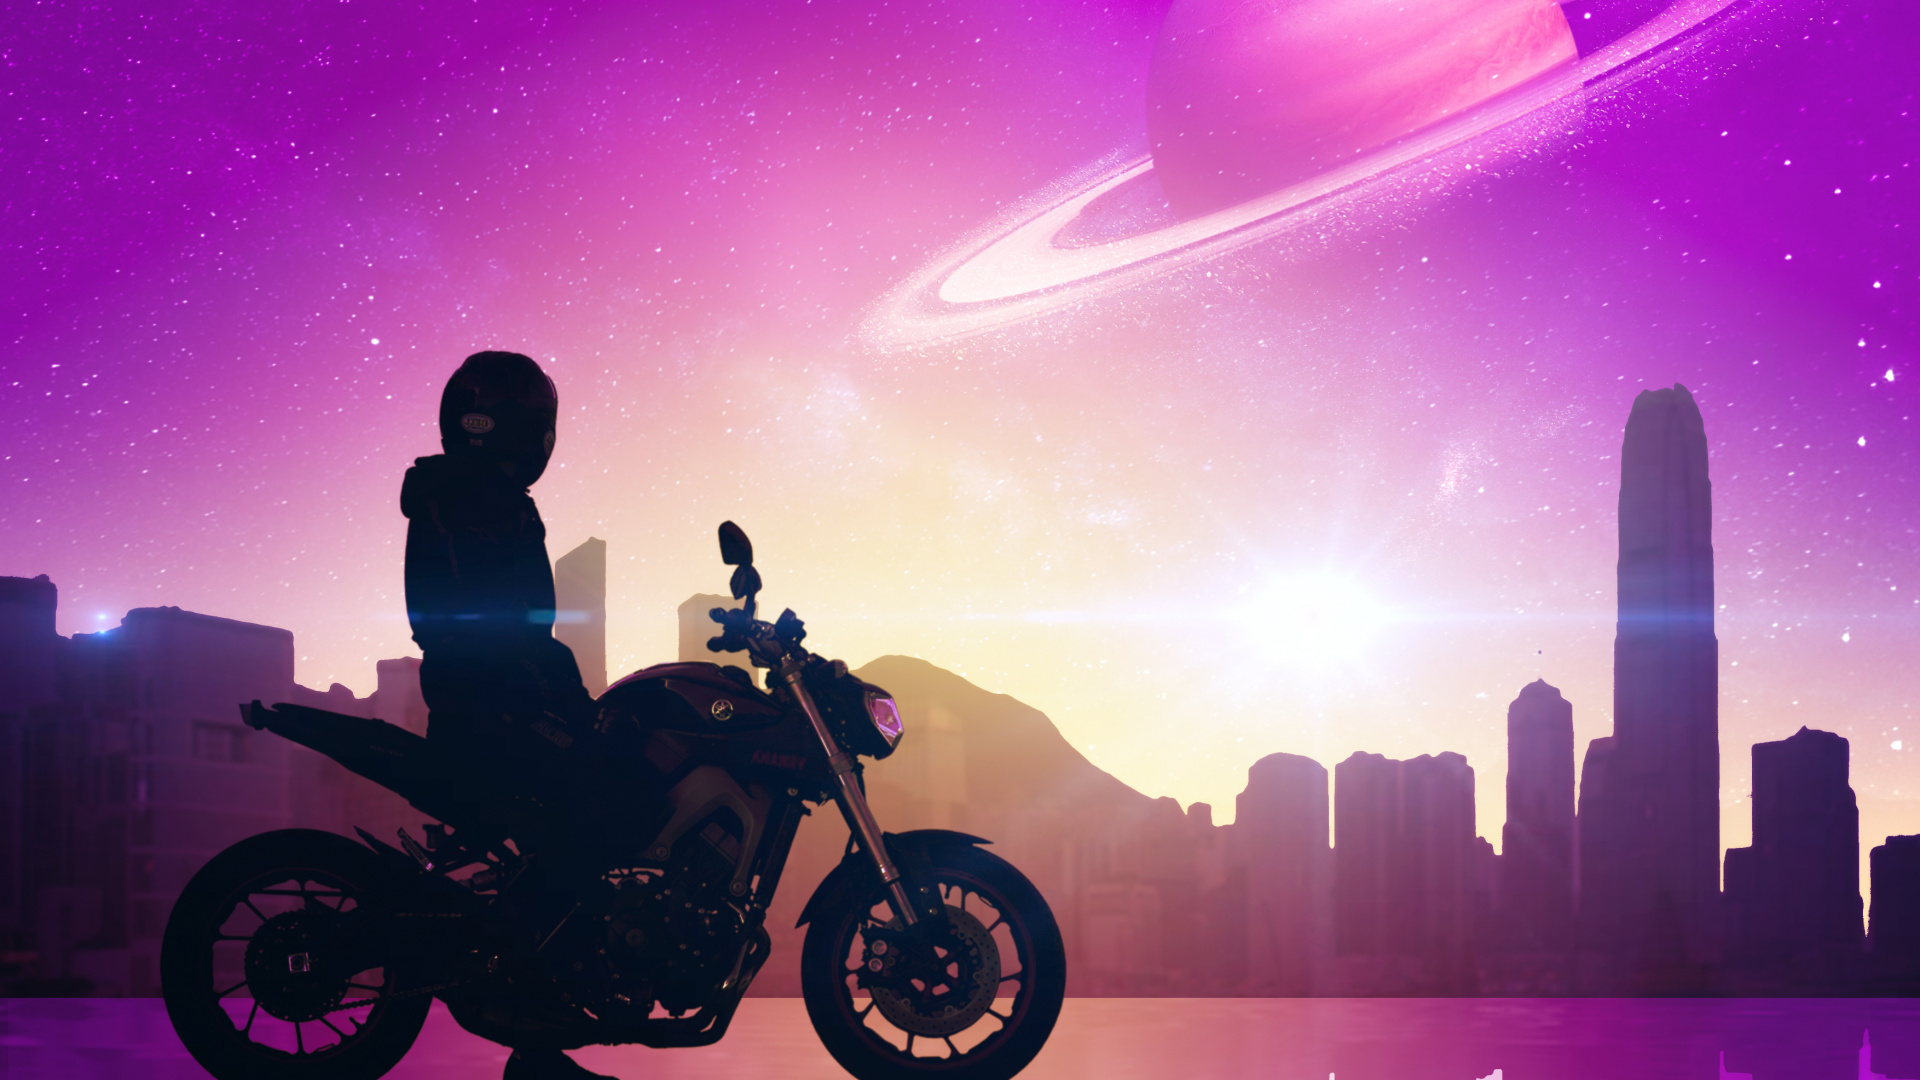 Man Riding Motorcycle During Night Time. Wallpaper in 1920x1080 Resolution